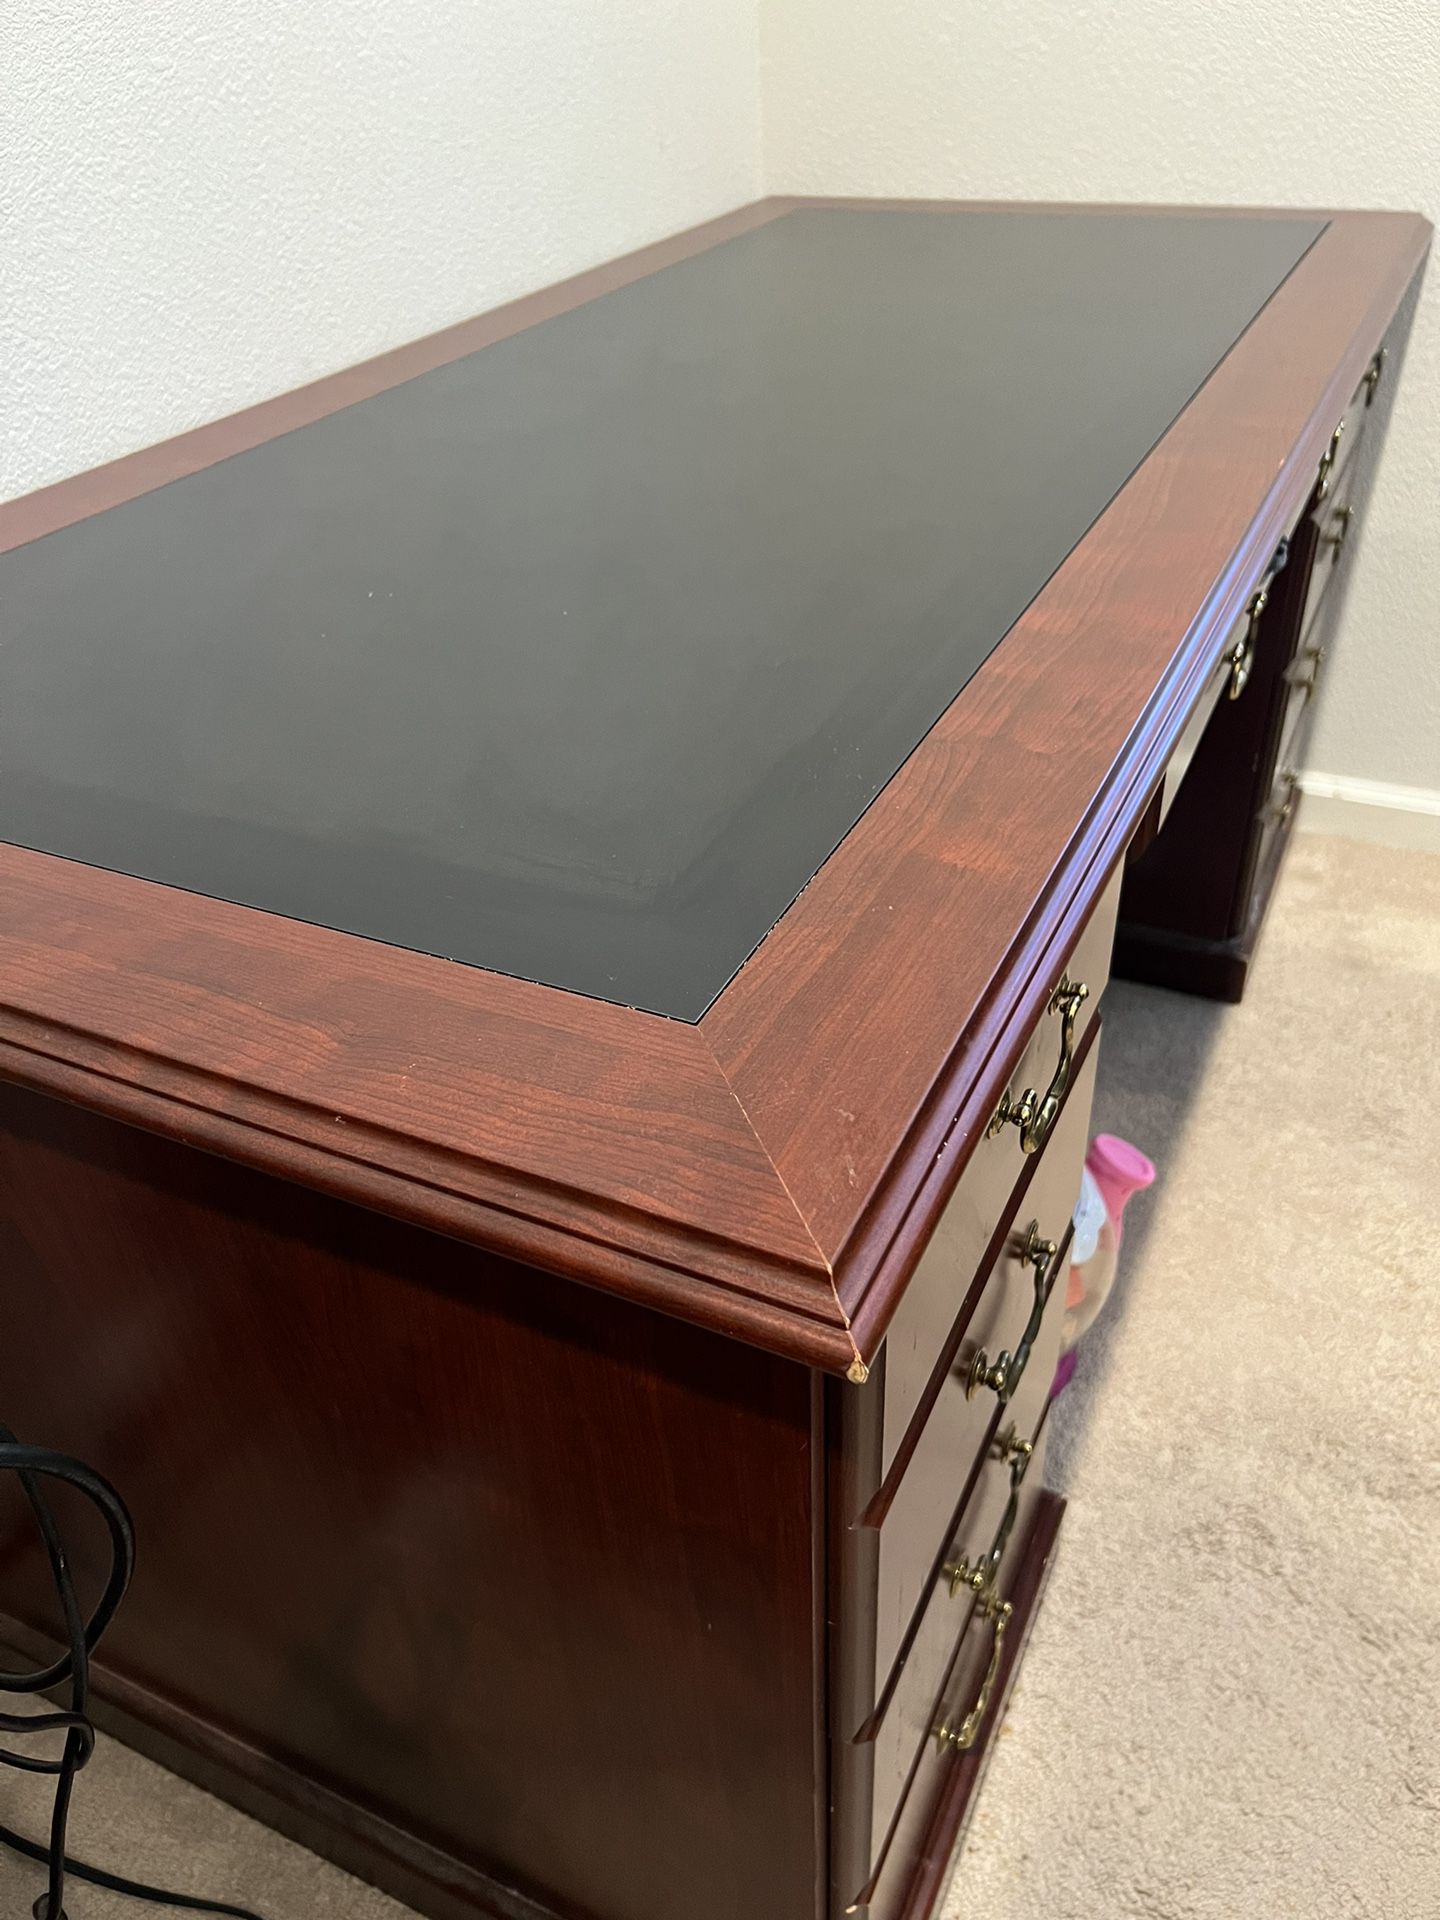 Clean And Neat Wooden Table - Must Go